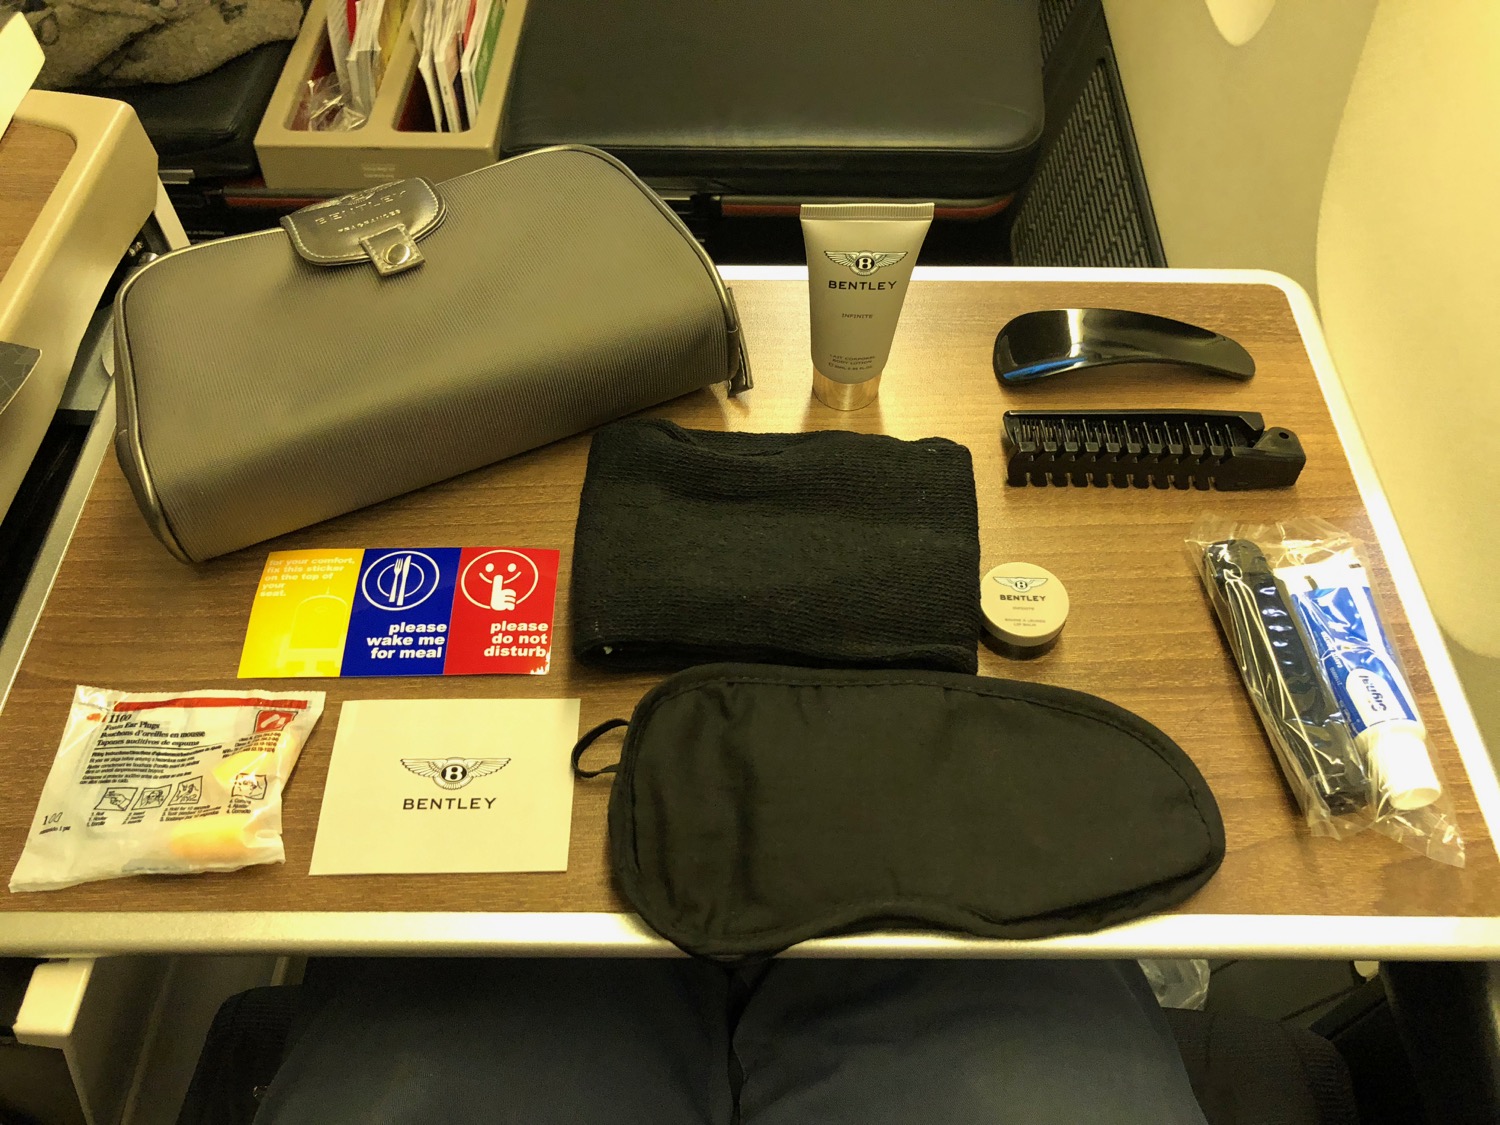 a table with a bag and other items on it